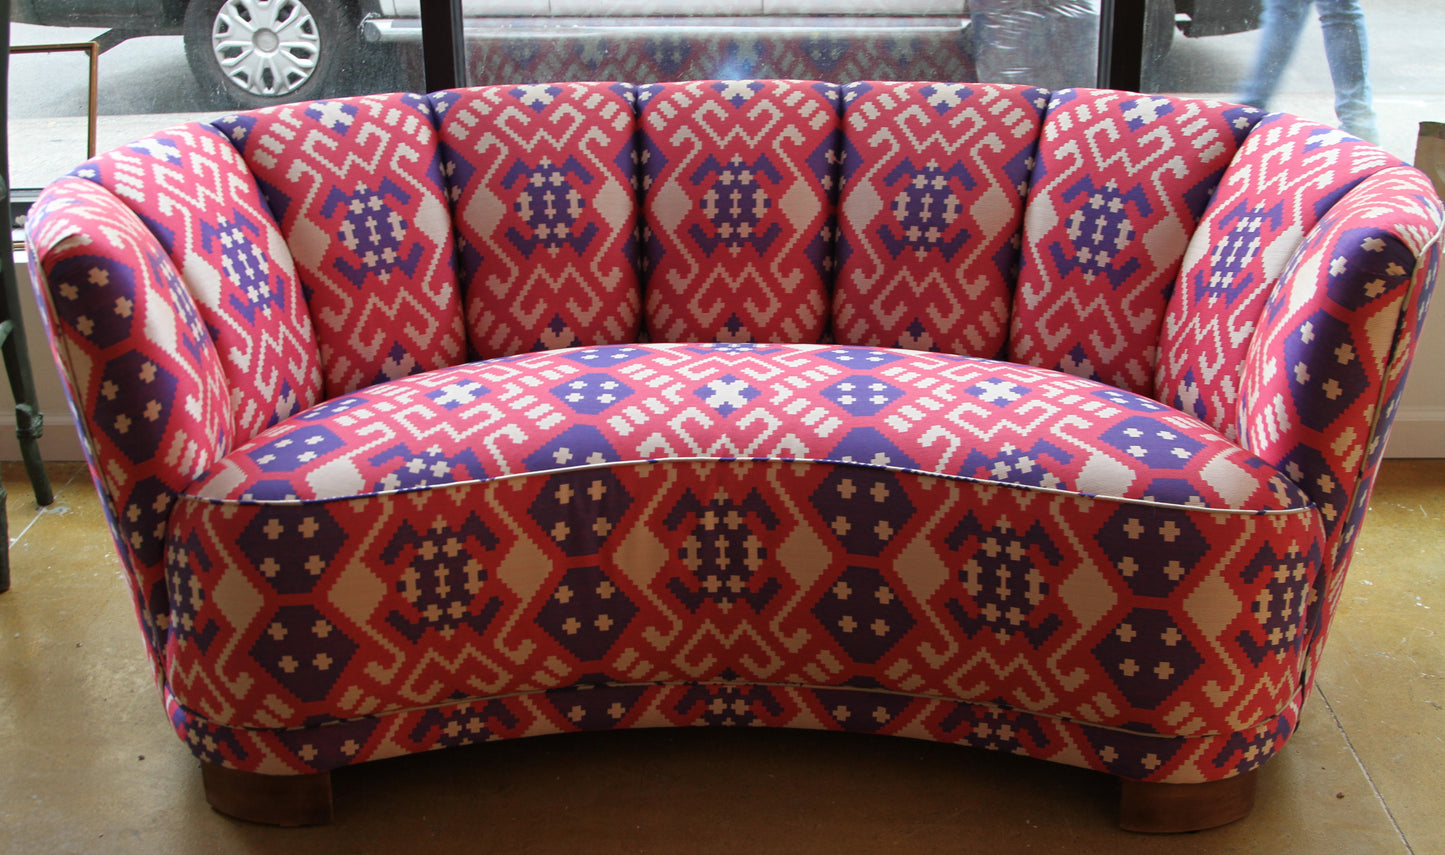 Danish Curved Loveseat with Stunning Couture Fabric - ON SALE!